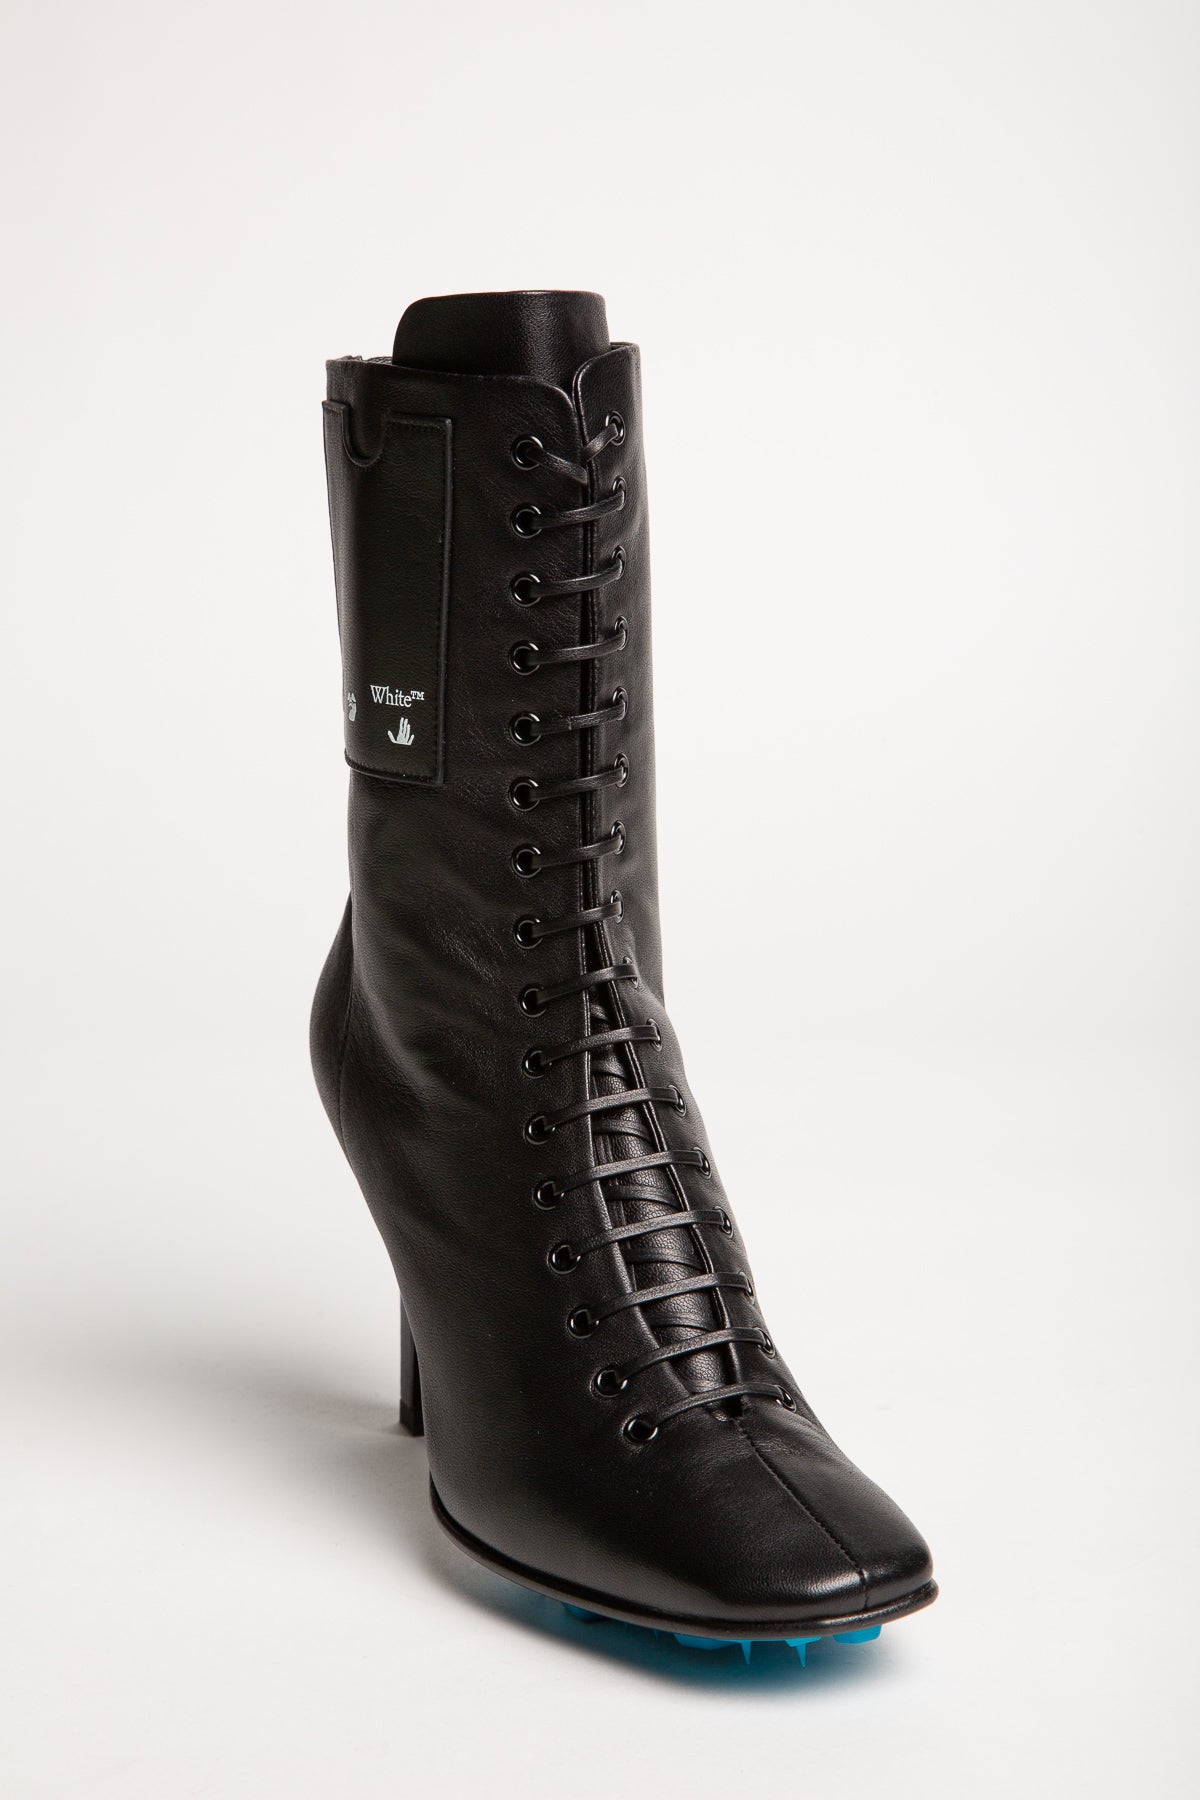 OFF-WHITE | HIGH HEEL LACE UP ANKLE BOOTS